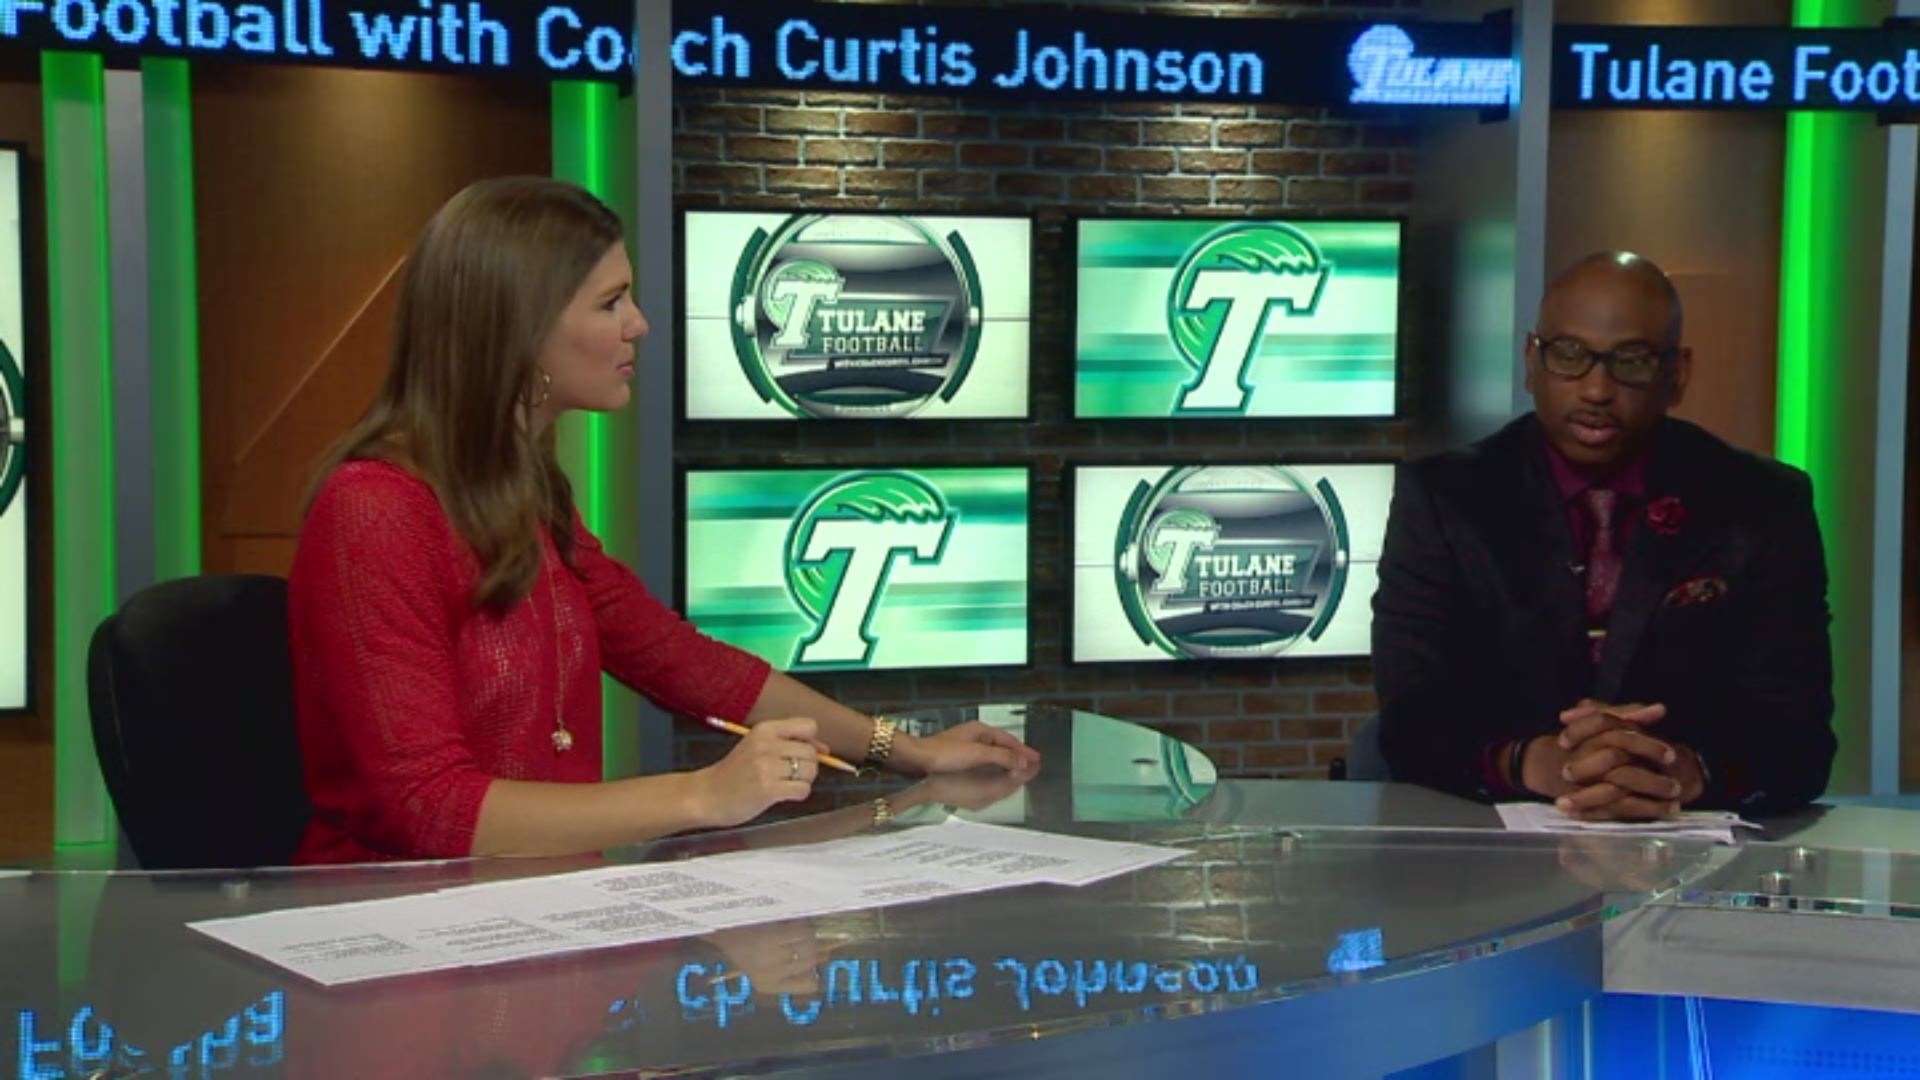 Tulane Coach's Show: Looking ahead to next week